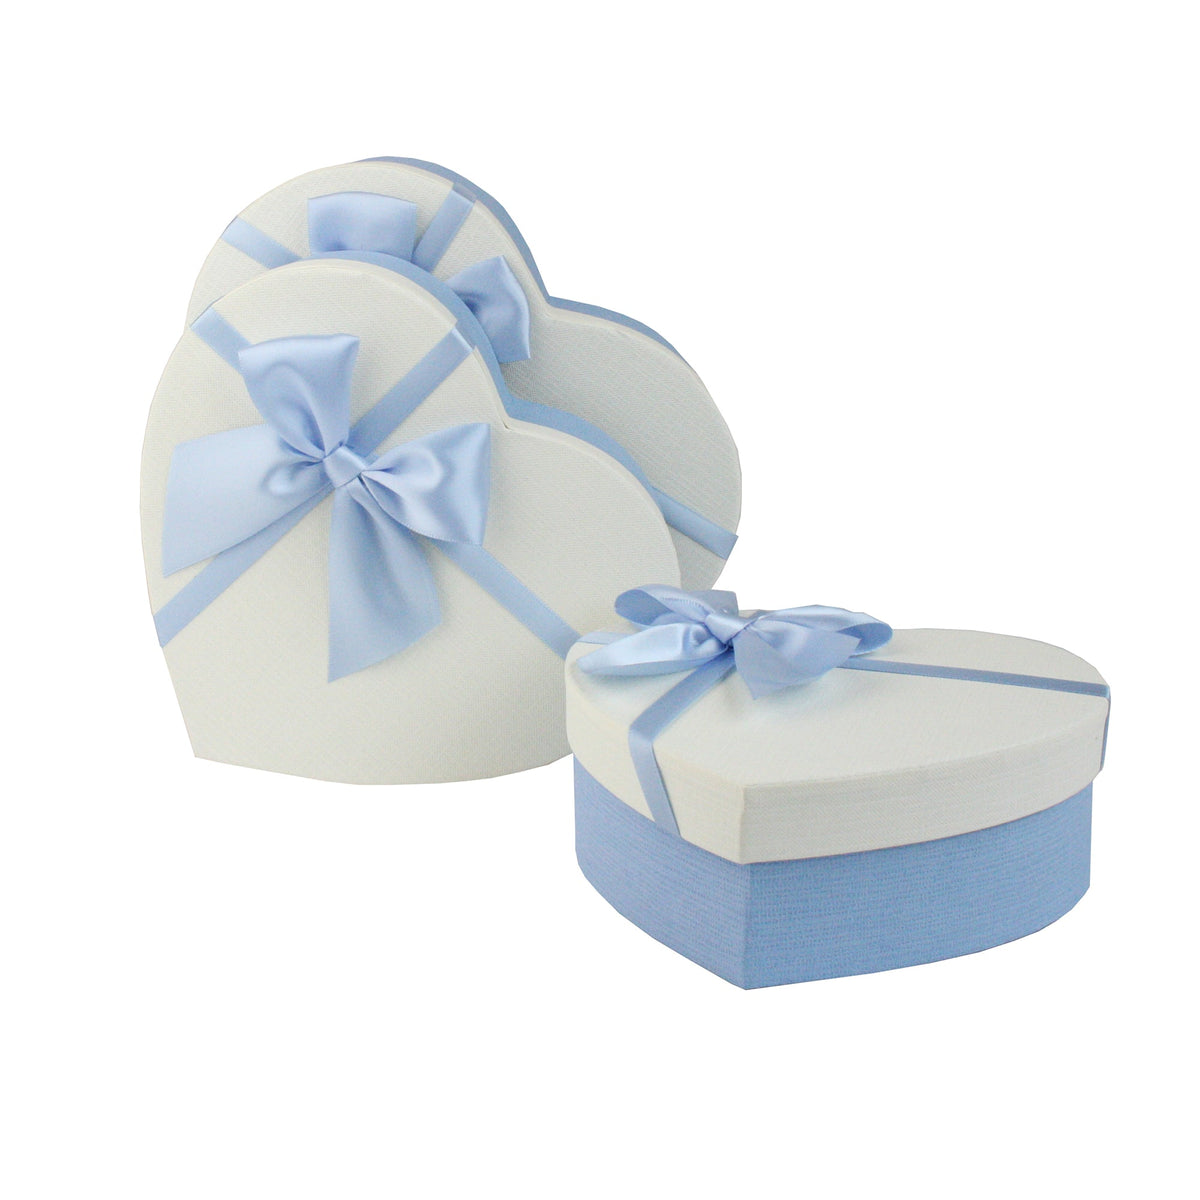 Set of 3 Blue/White Gift Boxes with Blue Satin Ribbon